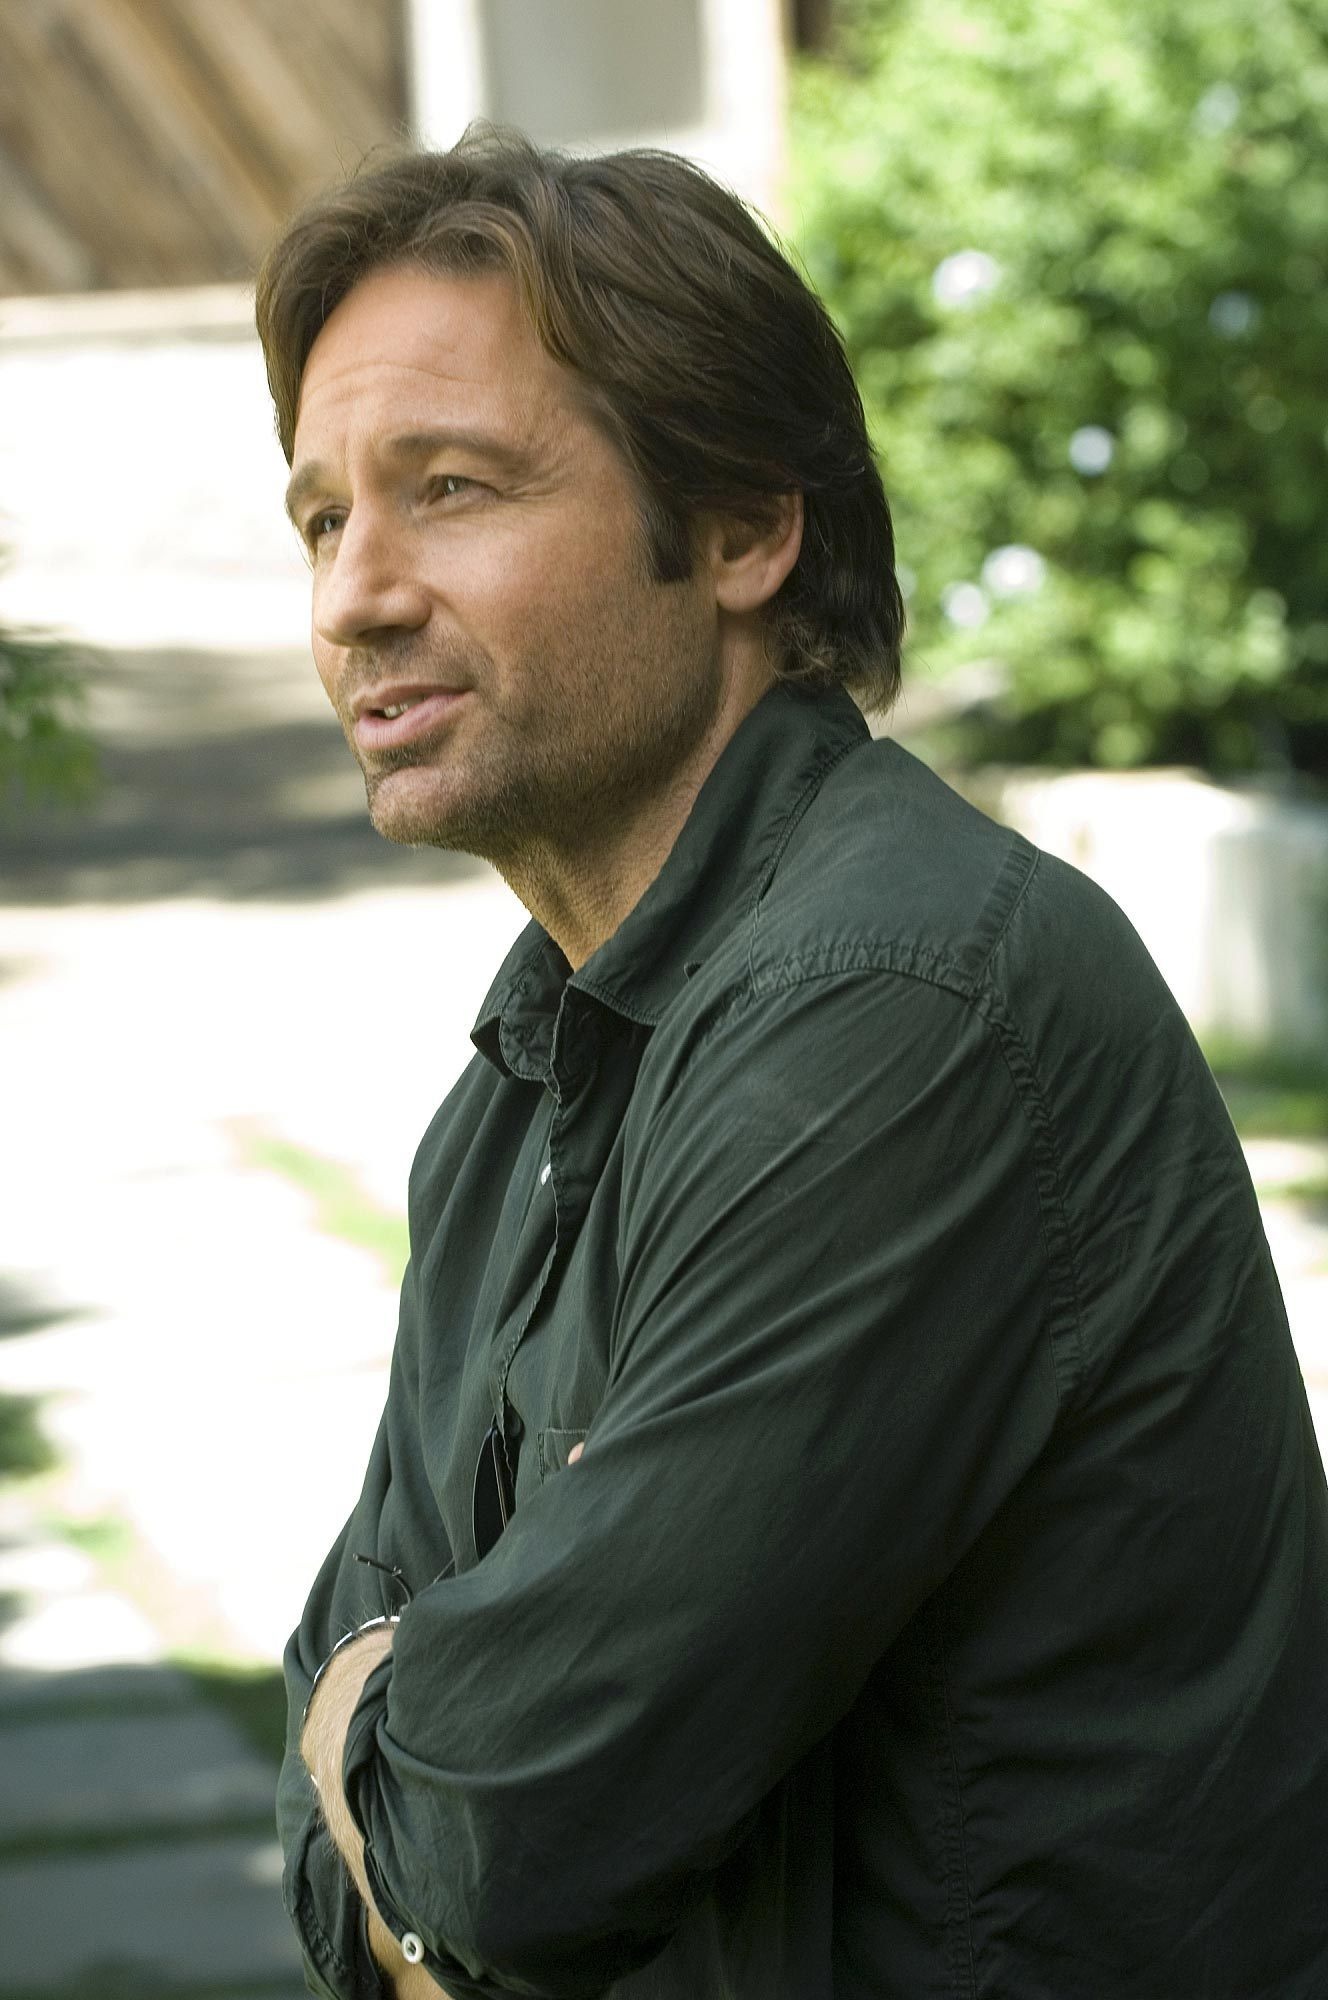 Californication (TV Series): Master of Arts in English Literature from Yale University. 1330x2000 HD Wallpaper.